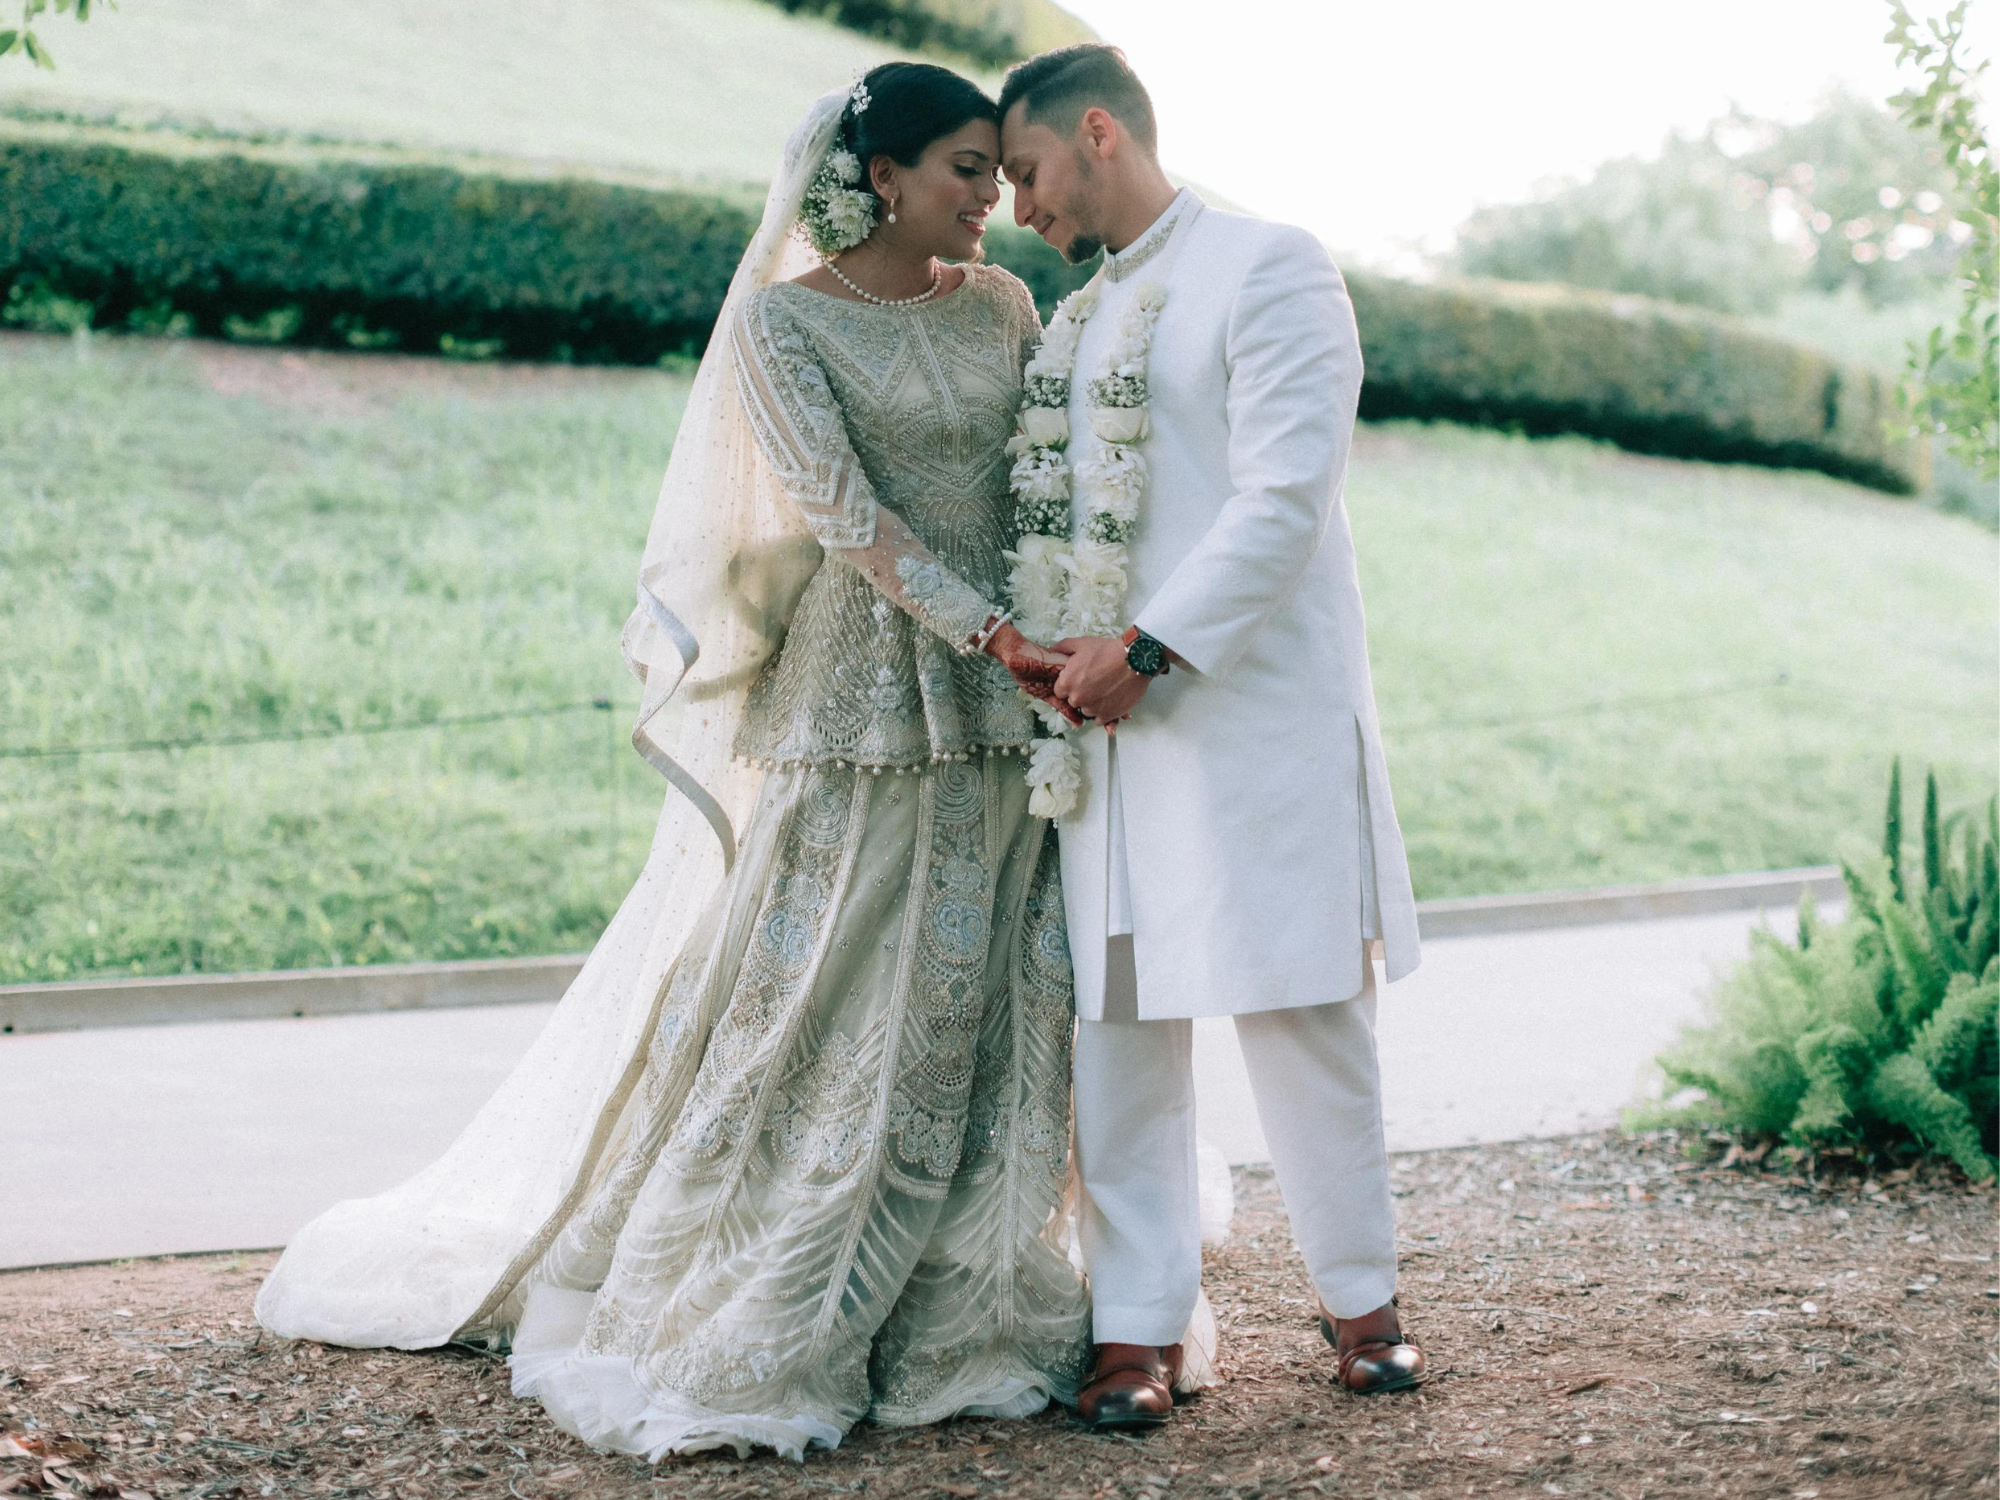 Bride and groom on wedding day planned by Epic Events by Marilyn Indian wedding planner in Houston, Texas